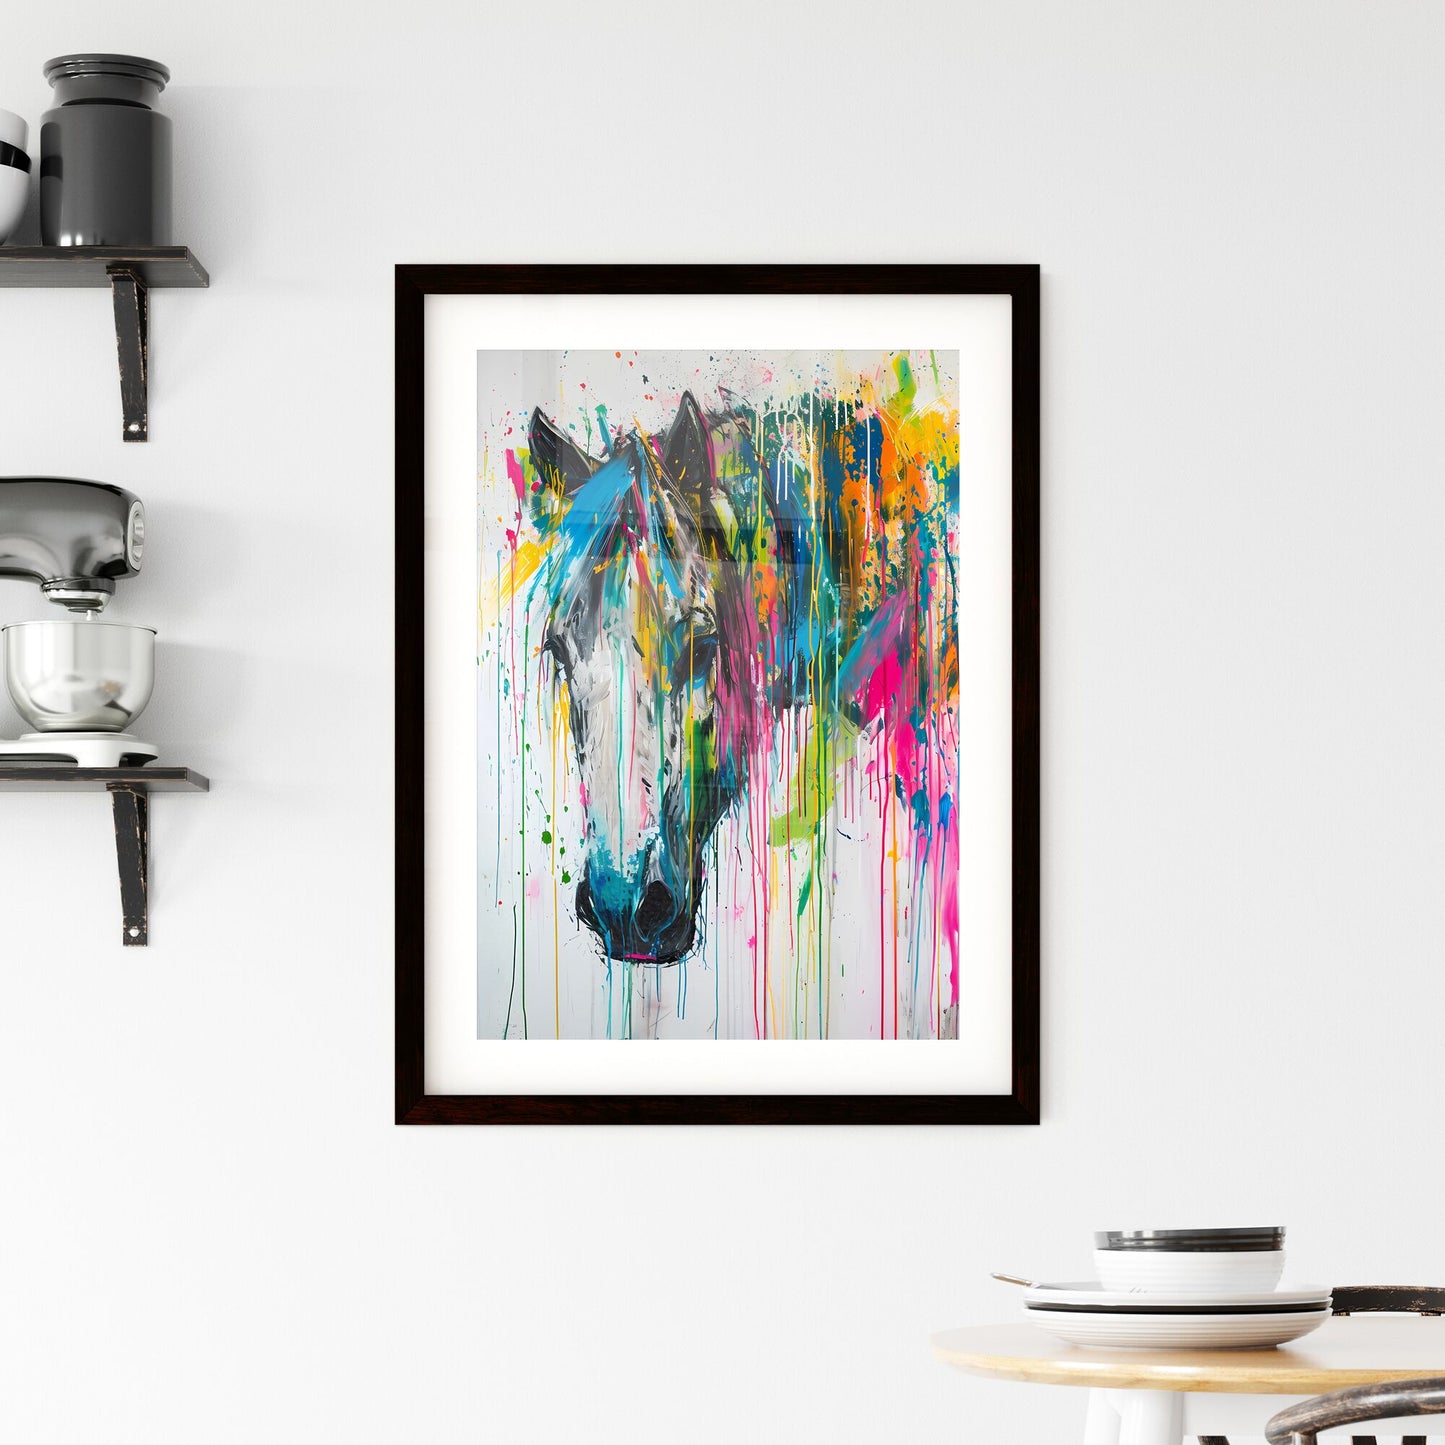 A Poster of showcase the beauty and spirit of horses - A Painting Of A Horse Default Title